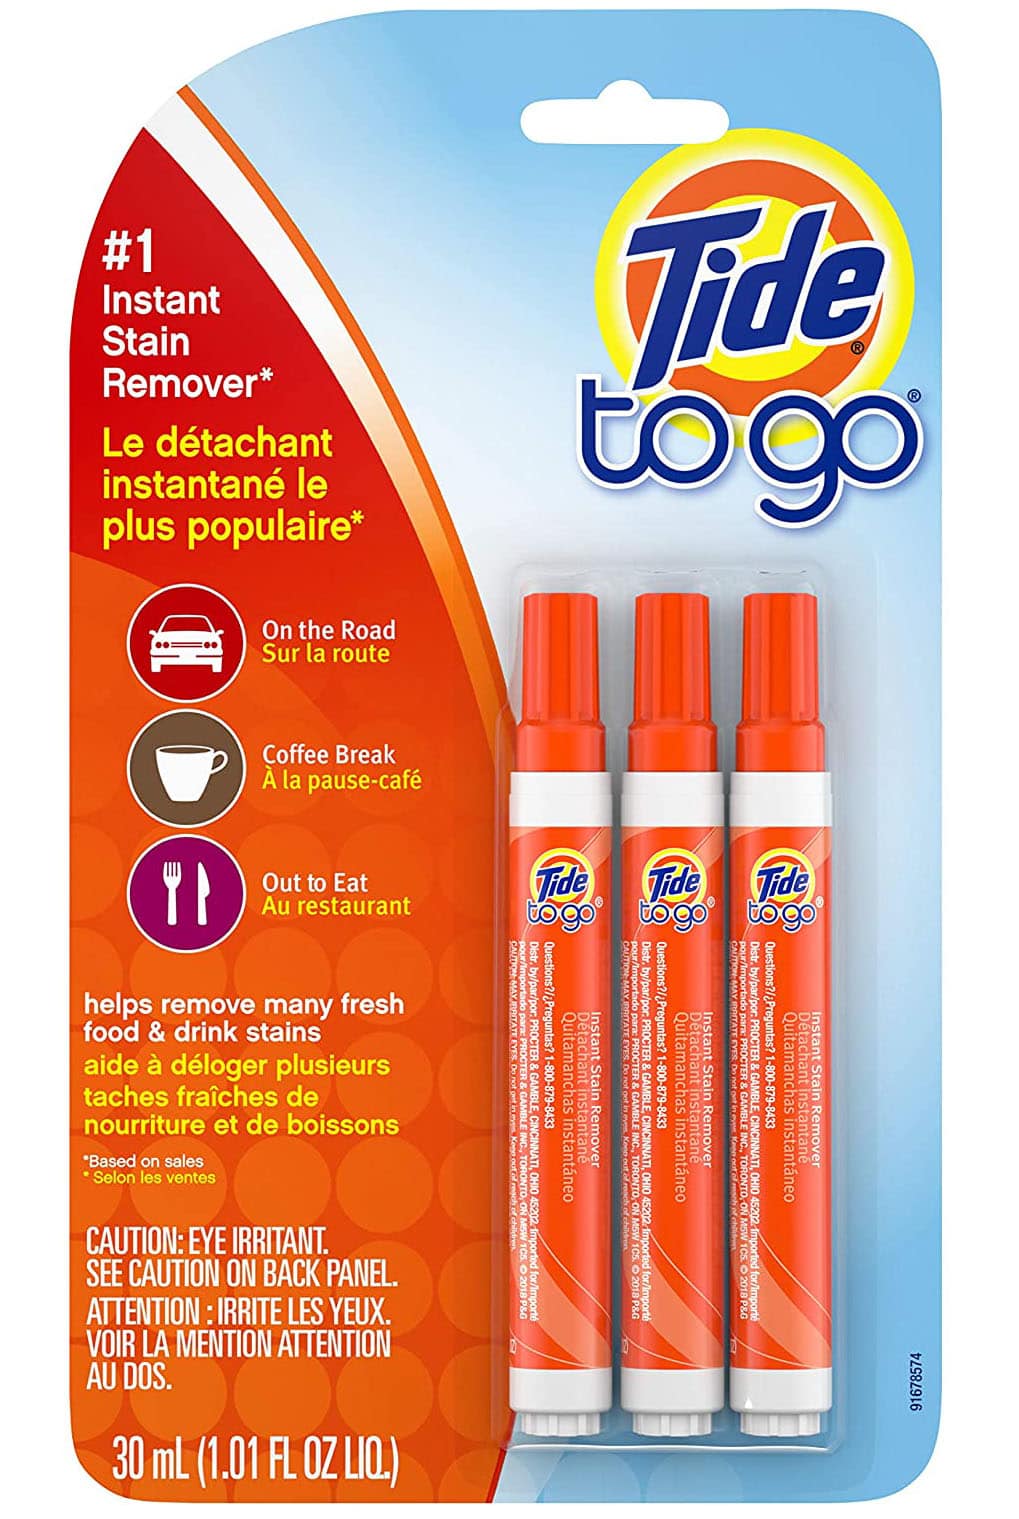 Portable and easy-to-use, the Tide To Go Instant Stain Remover Liquid Pen contains a powerful solution that breaks down stains and has a microfiber pad that lifts and absorbs the stains